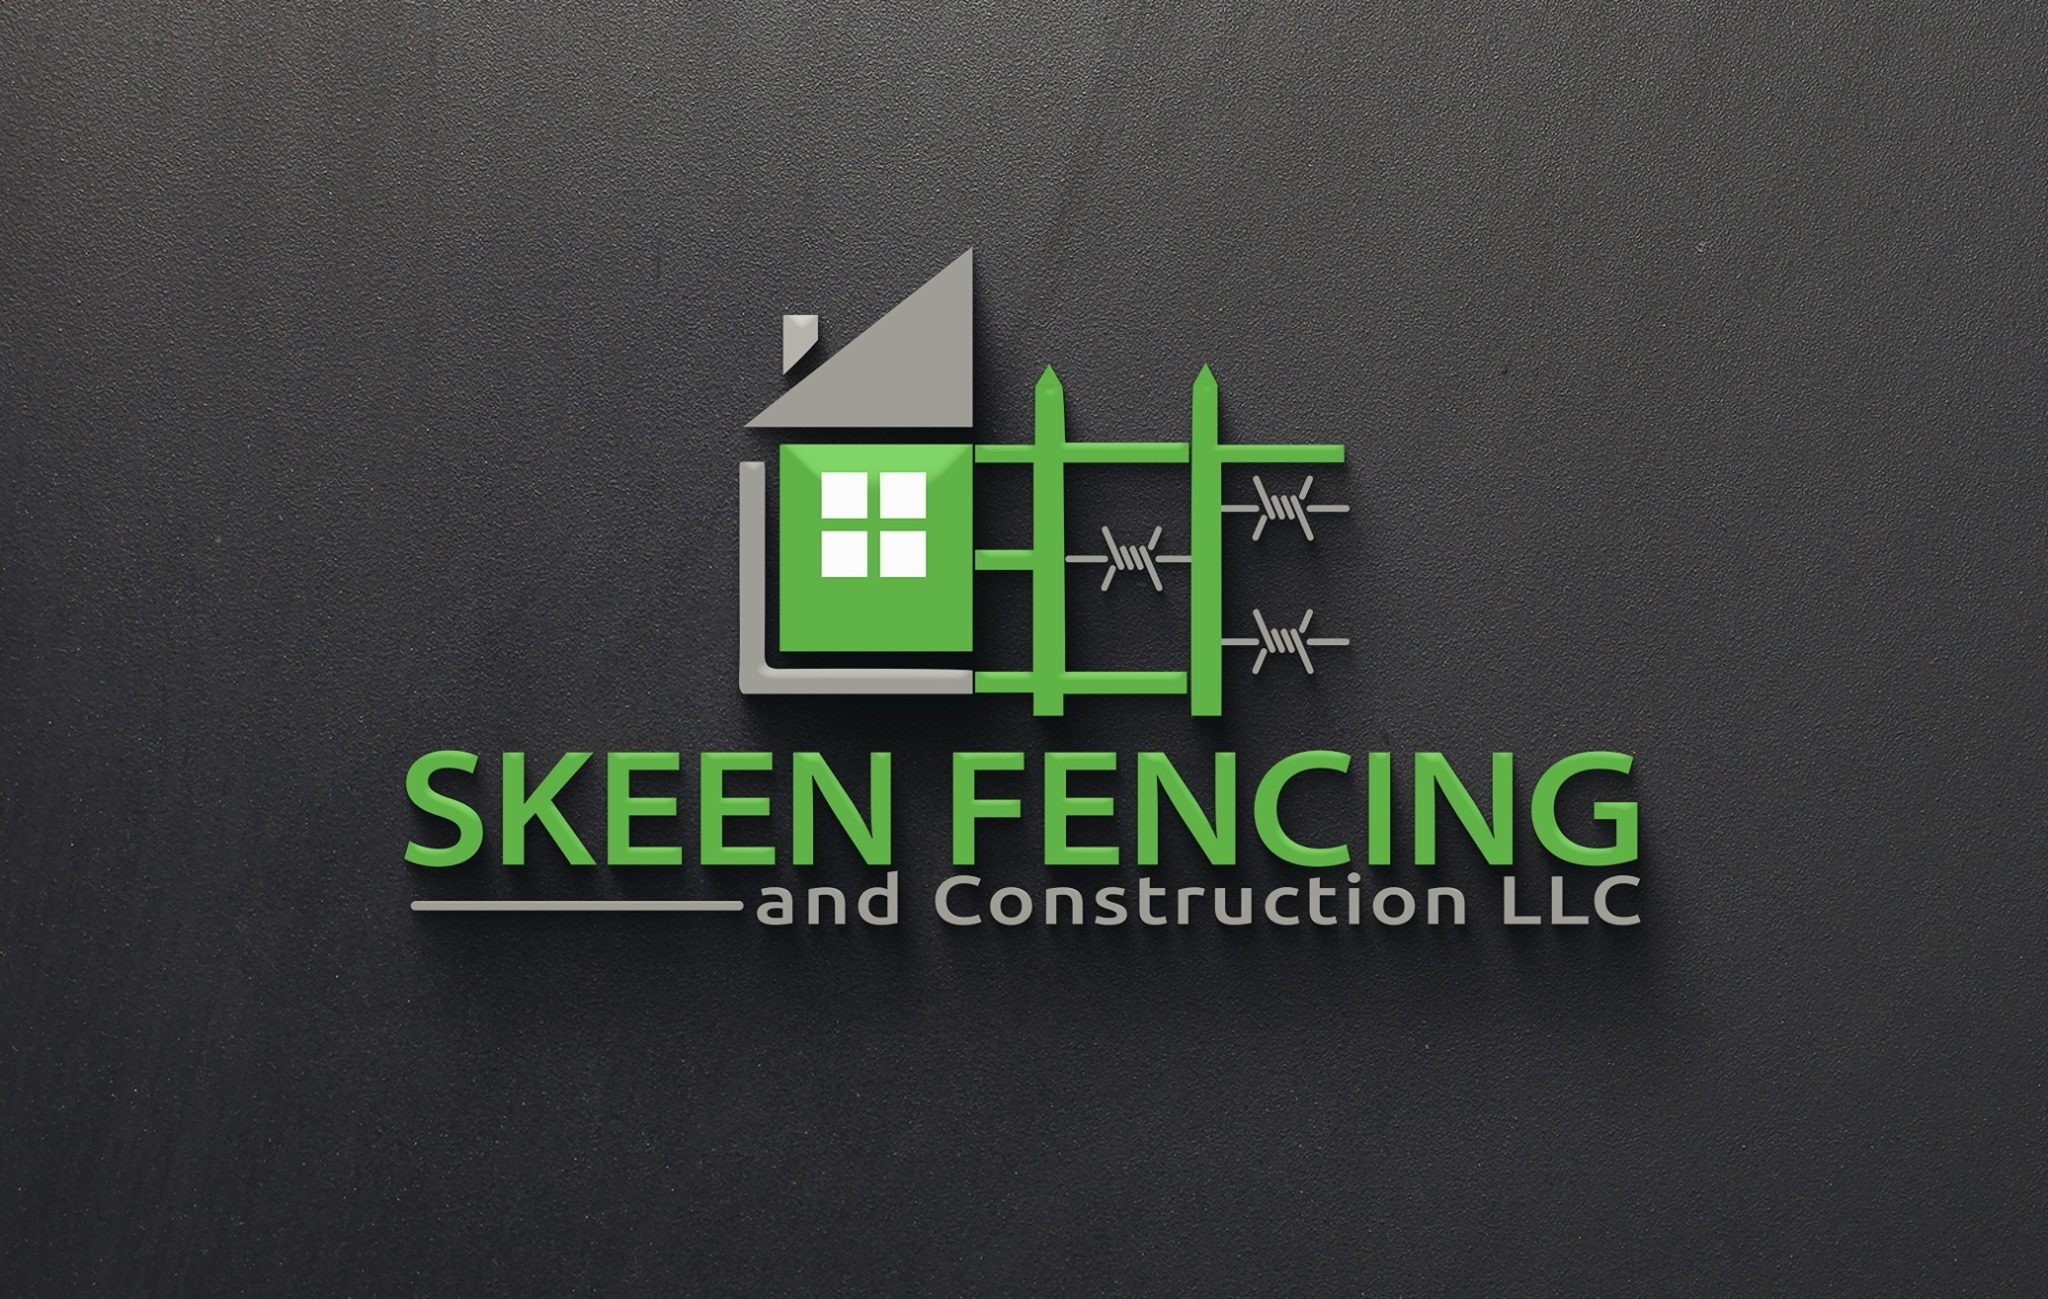 Skeen Fencing and Construction LLC